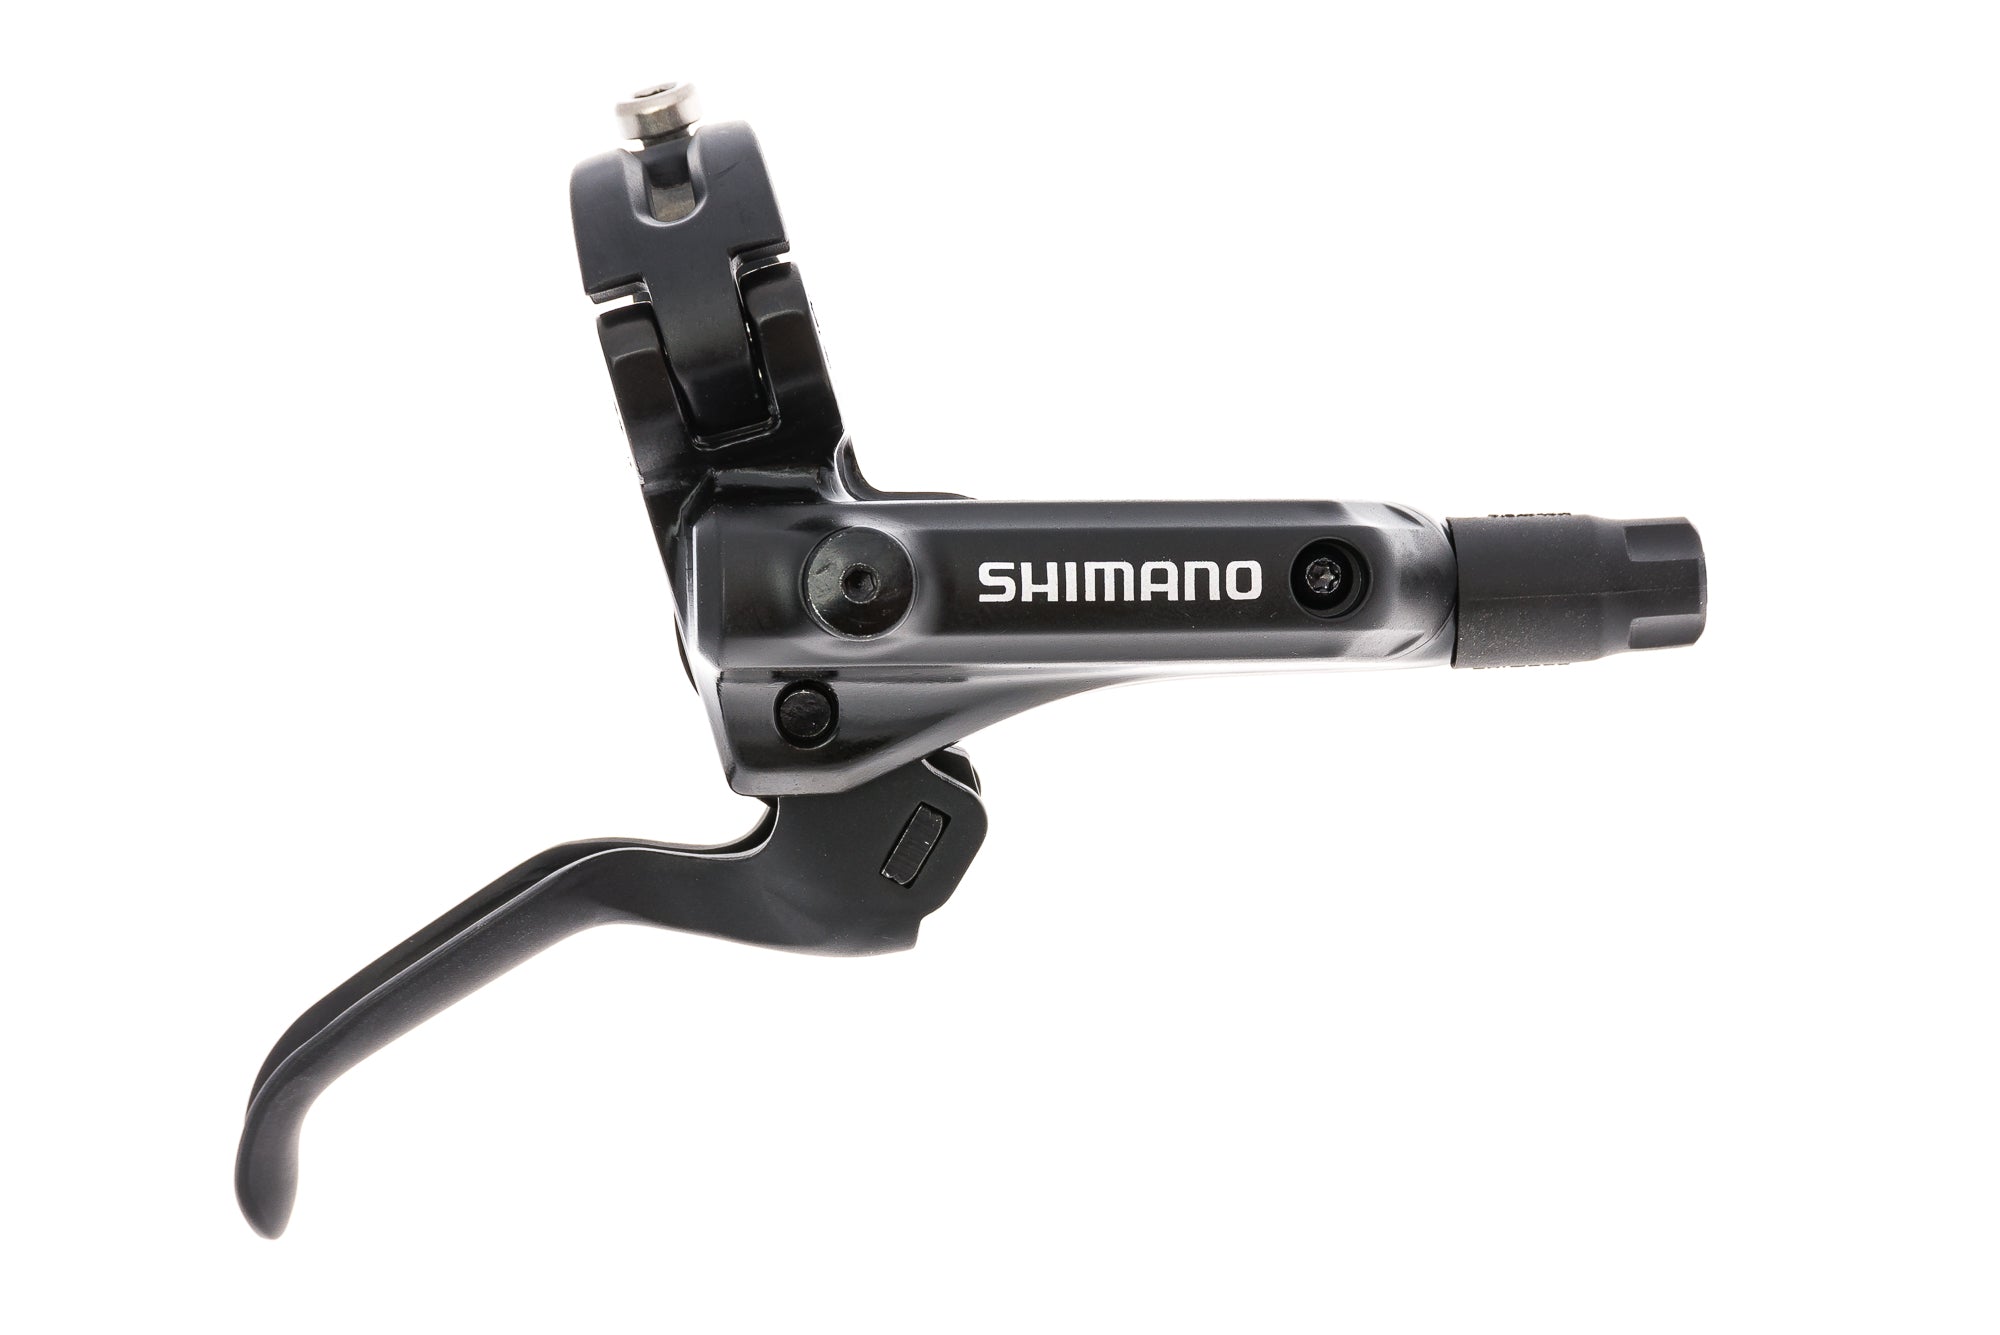 Shimano Deore Br M447 Rightrear Hydraulic Disc The Pros Closet